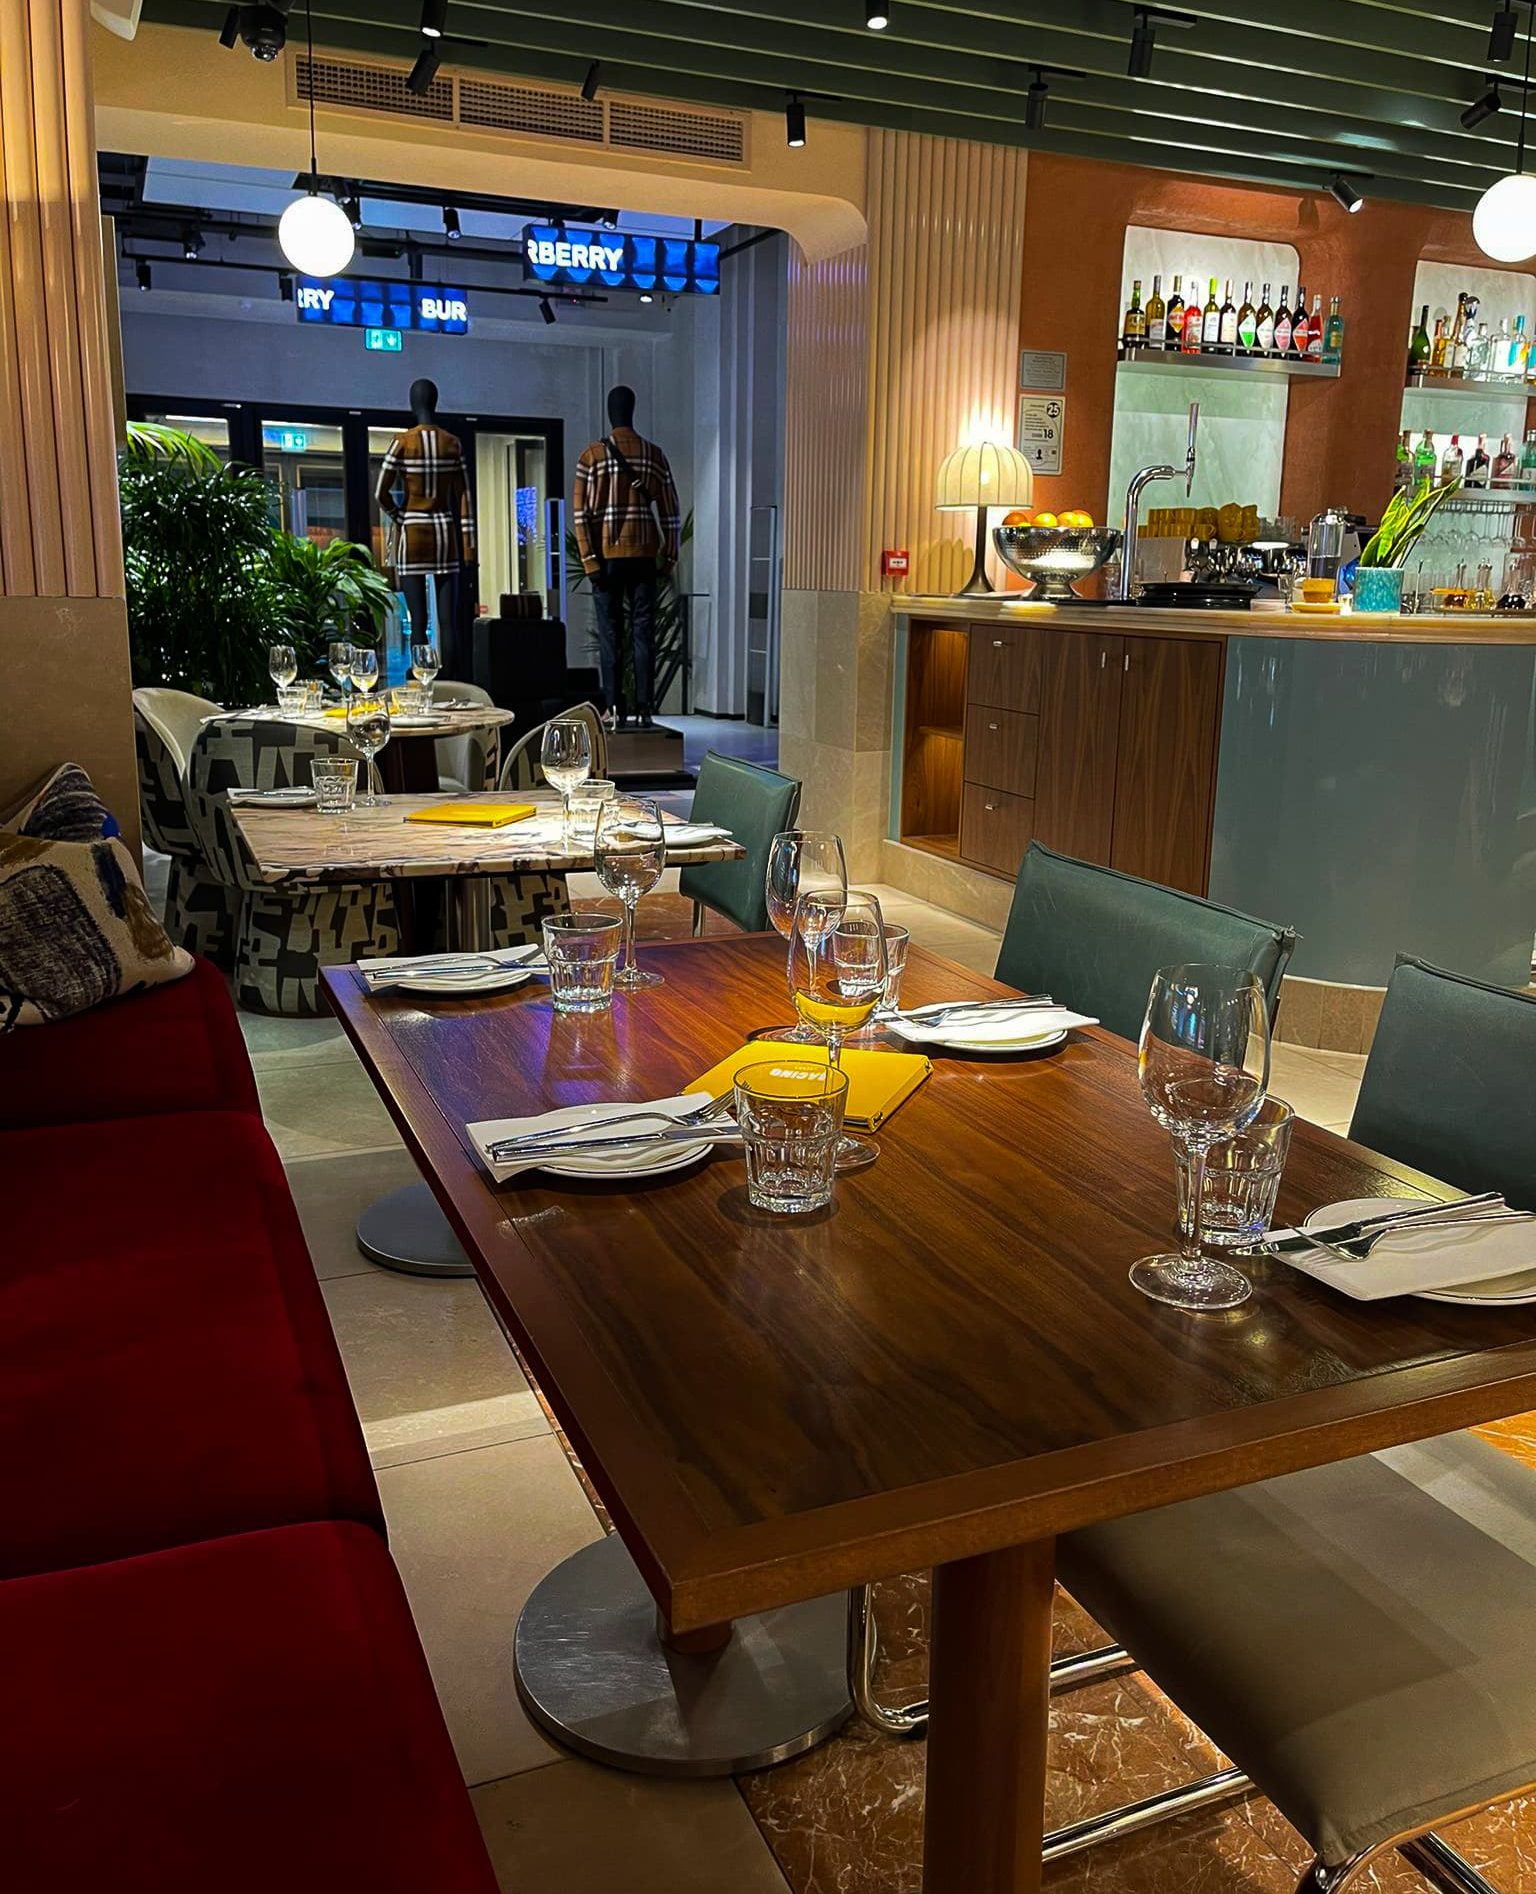 this is a look inside Bacino, Liverpool showing the larger dining tables and red velvet sofa